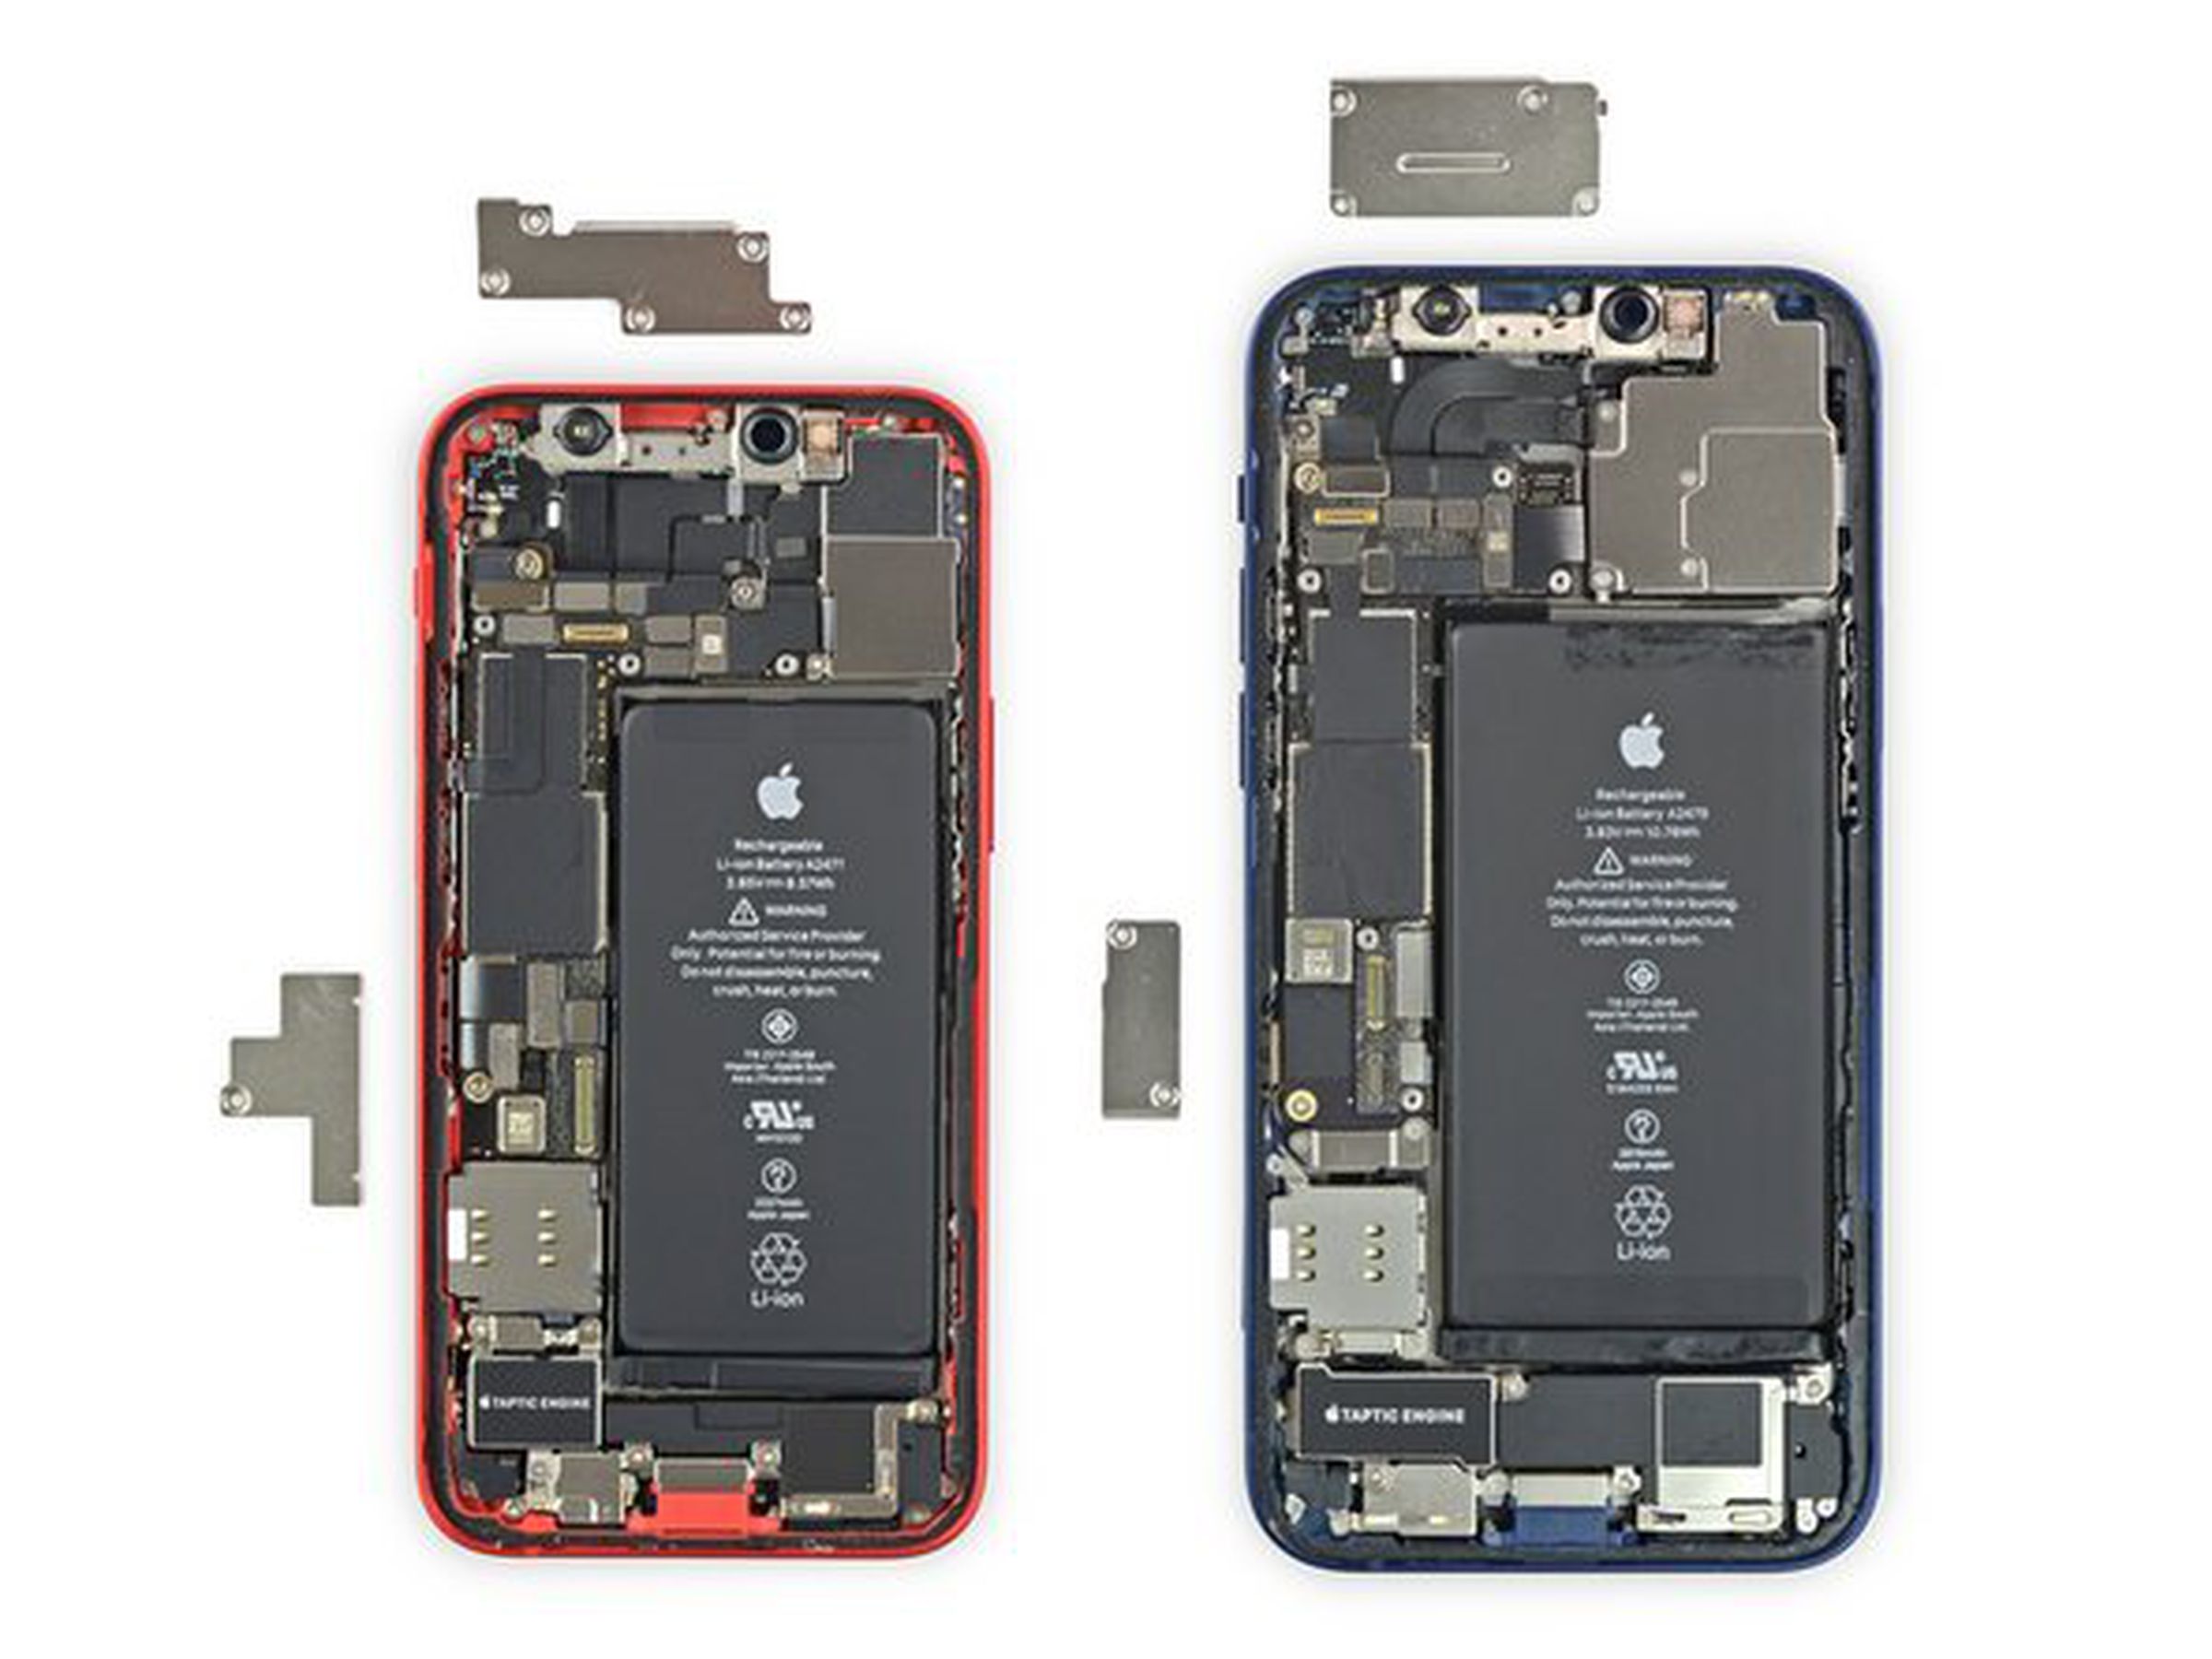 The iPhone 12 mini is on the left, the iPhone 12 on the right